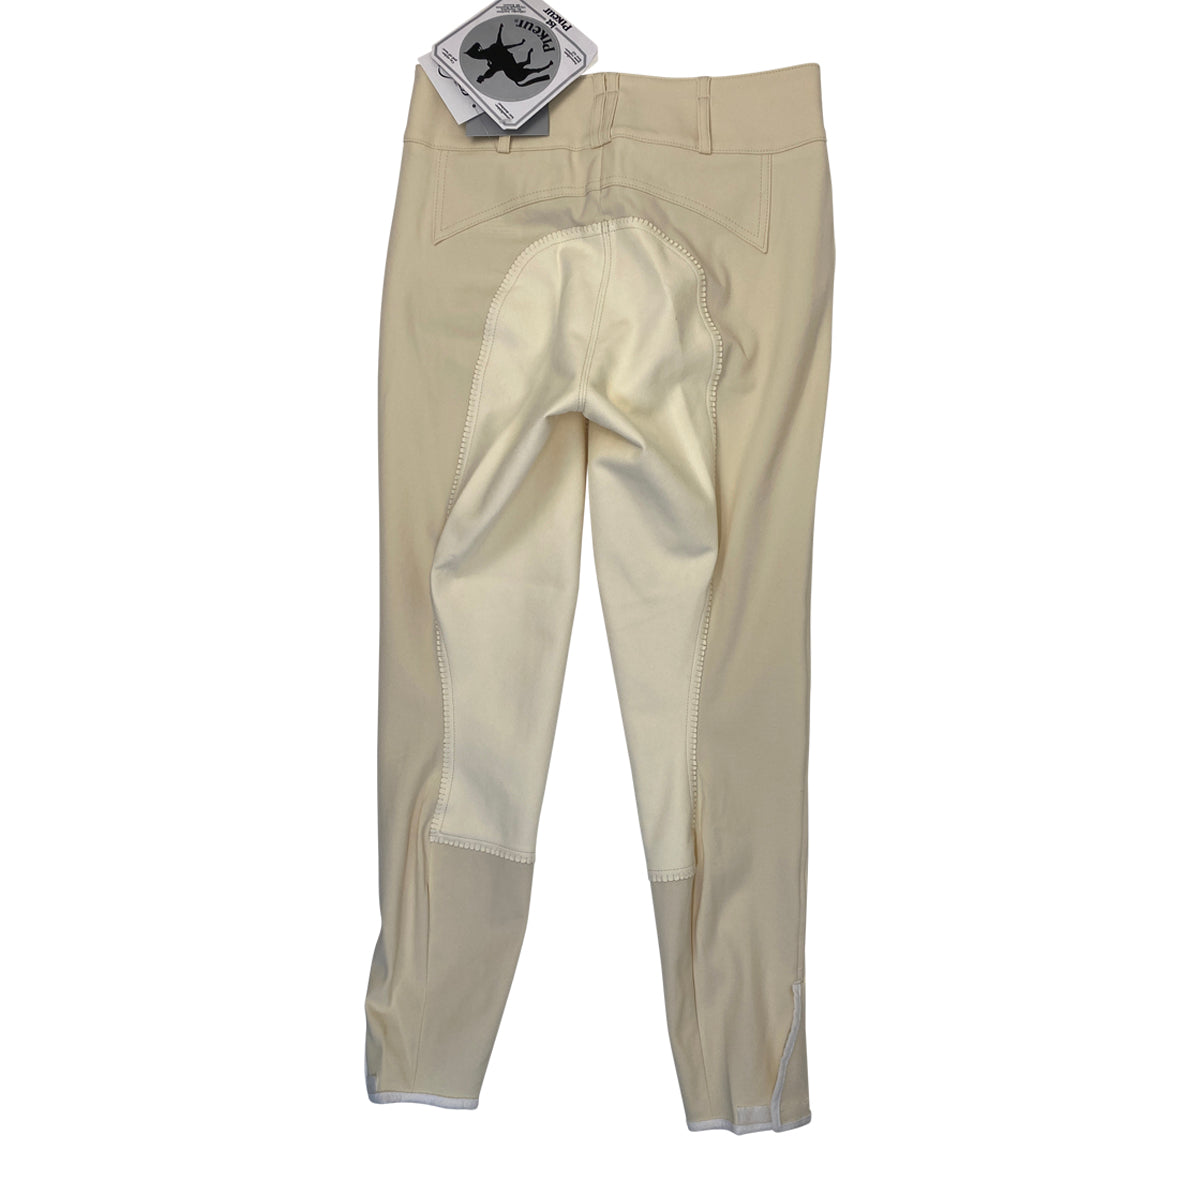 Pikeur 'Candela' Full Seat Breeches in Canary